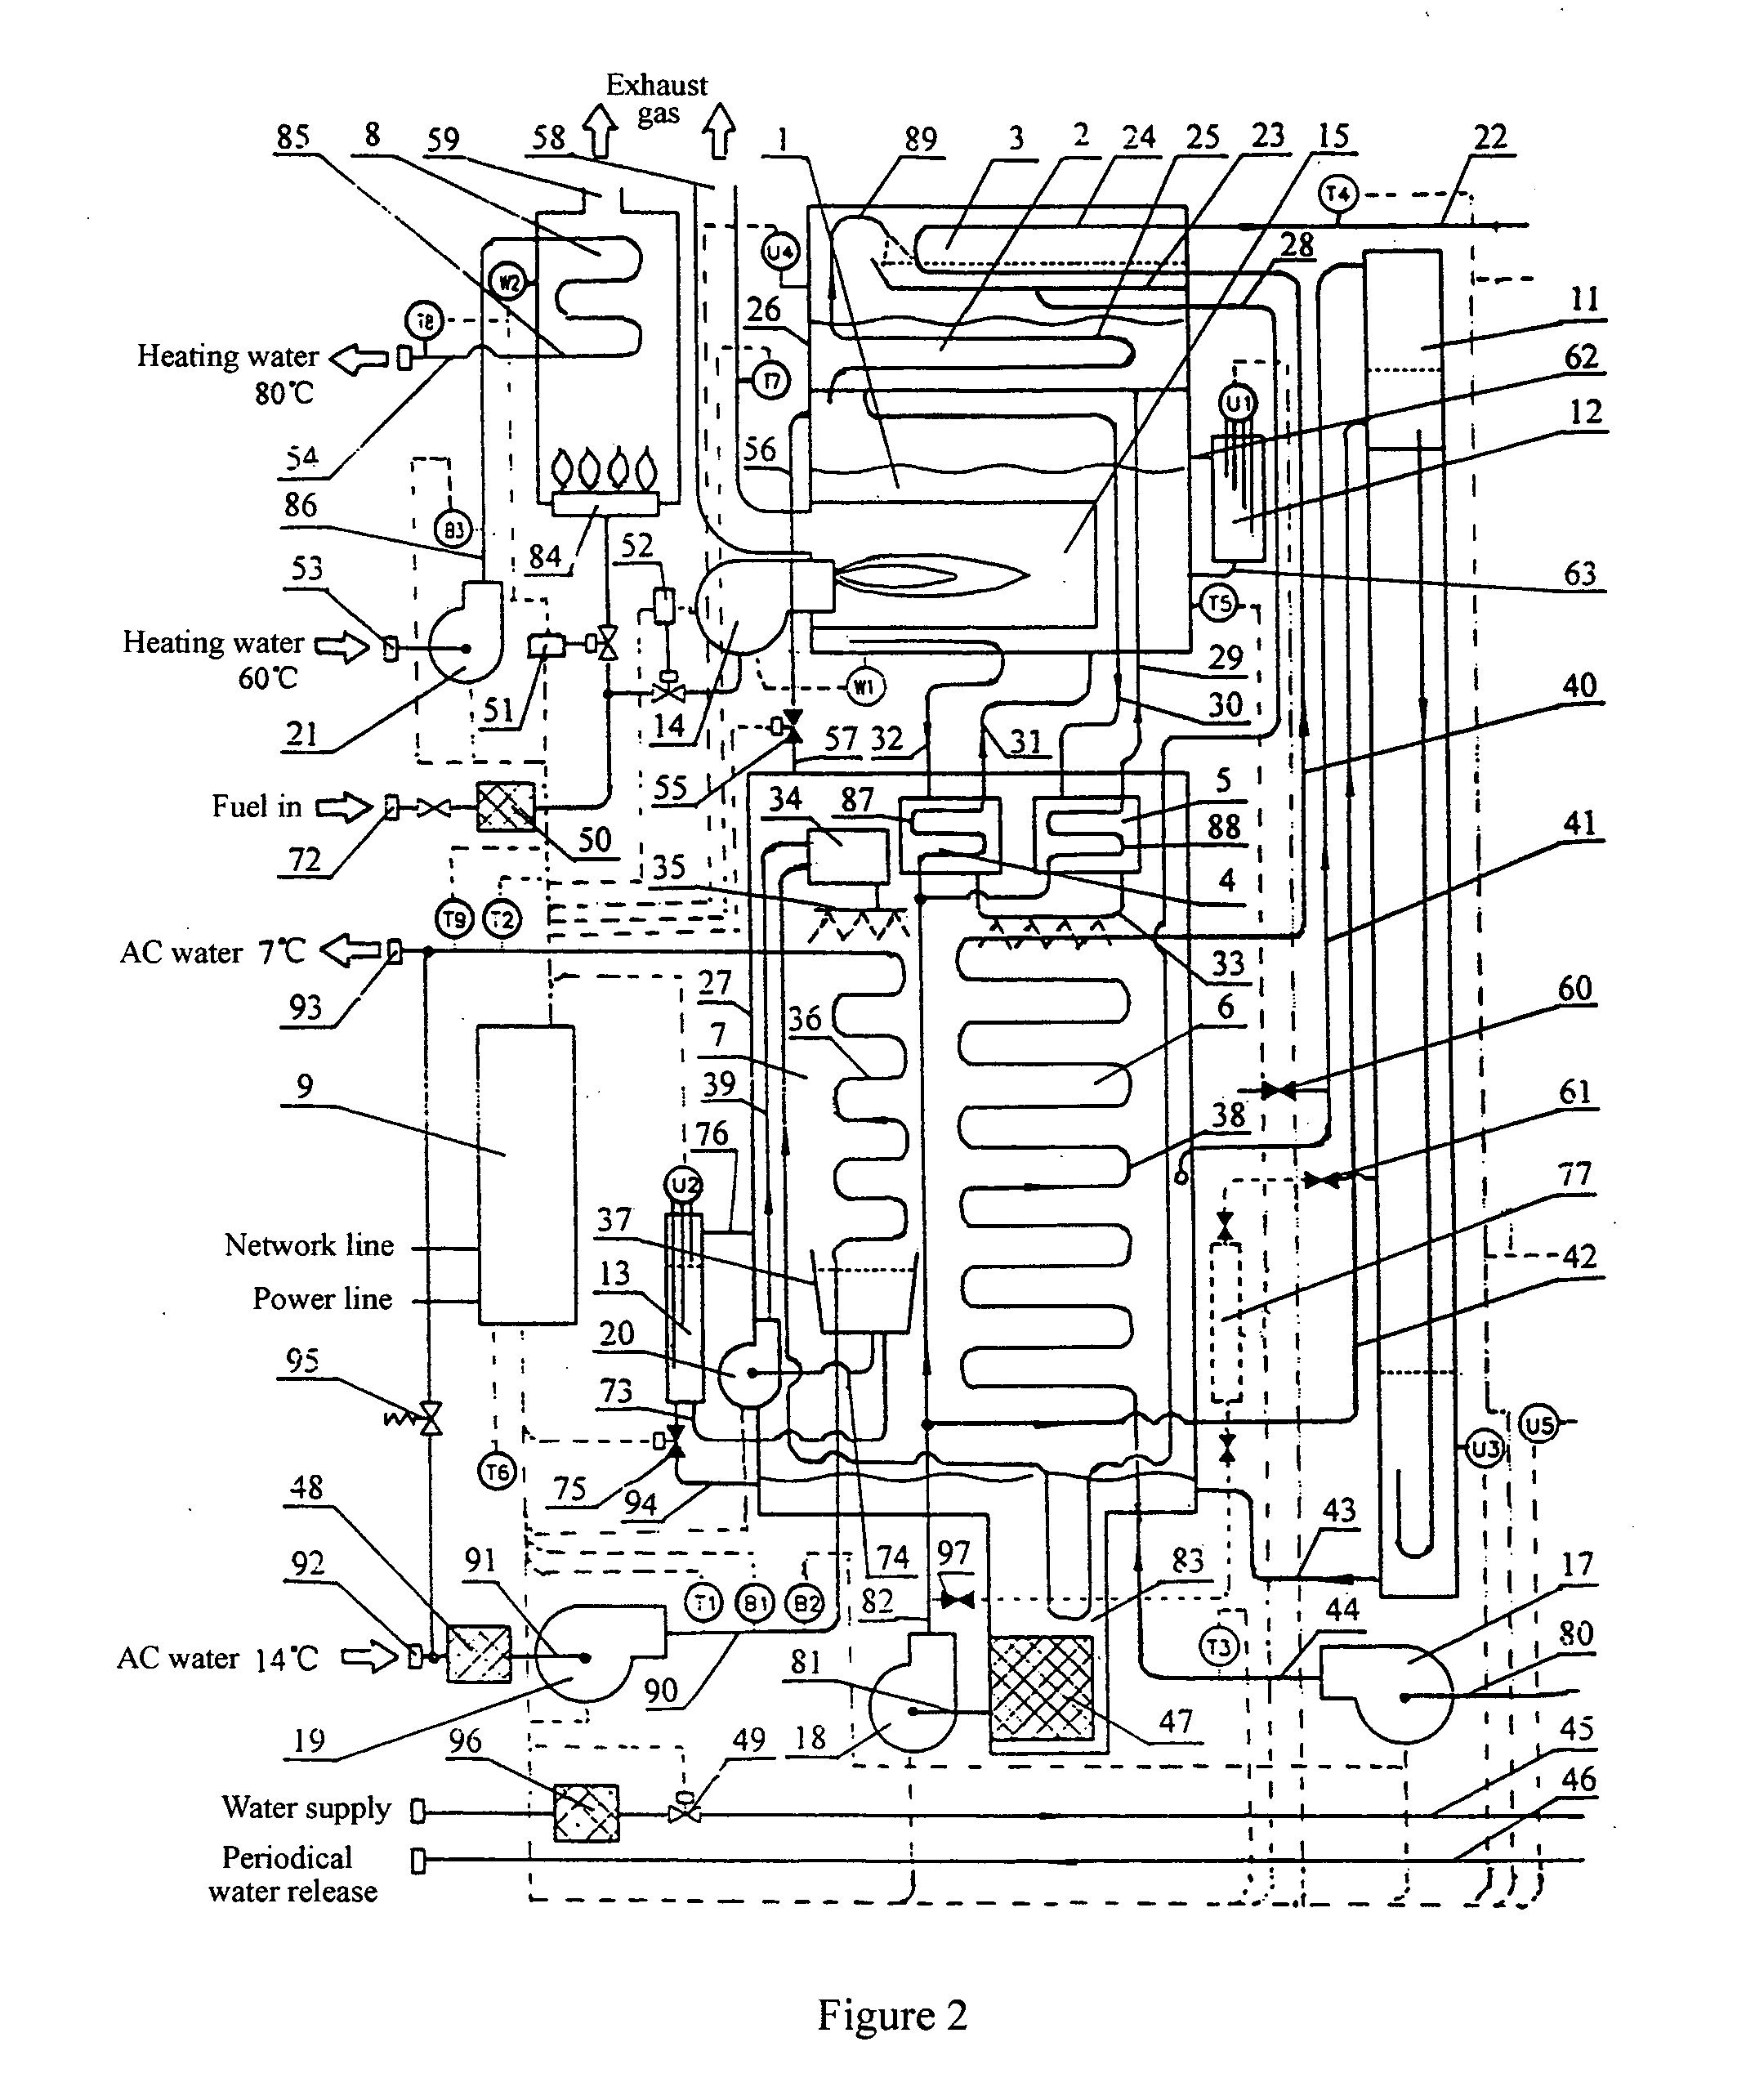 Absorption-type air conditioner system